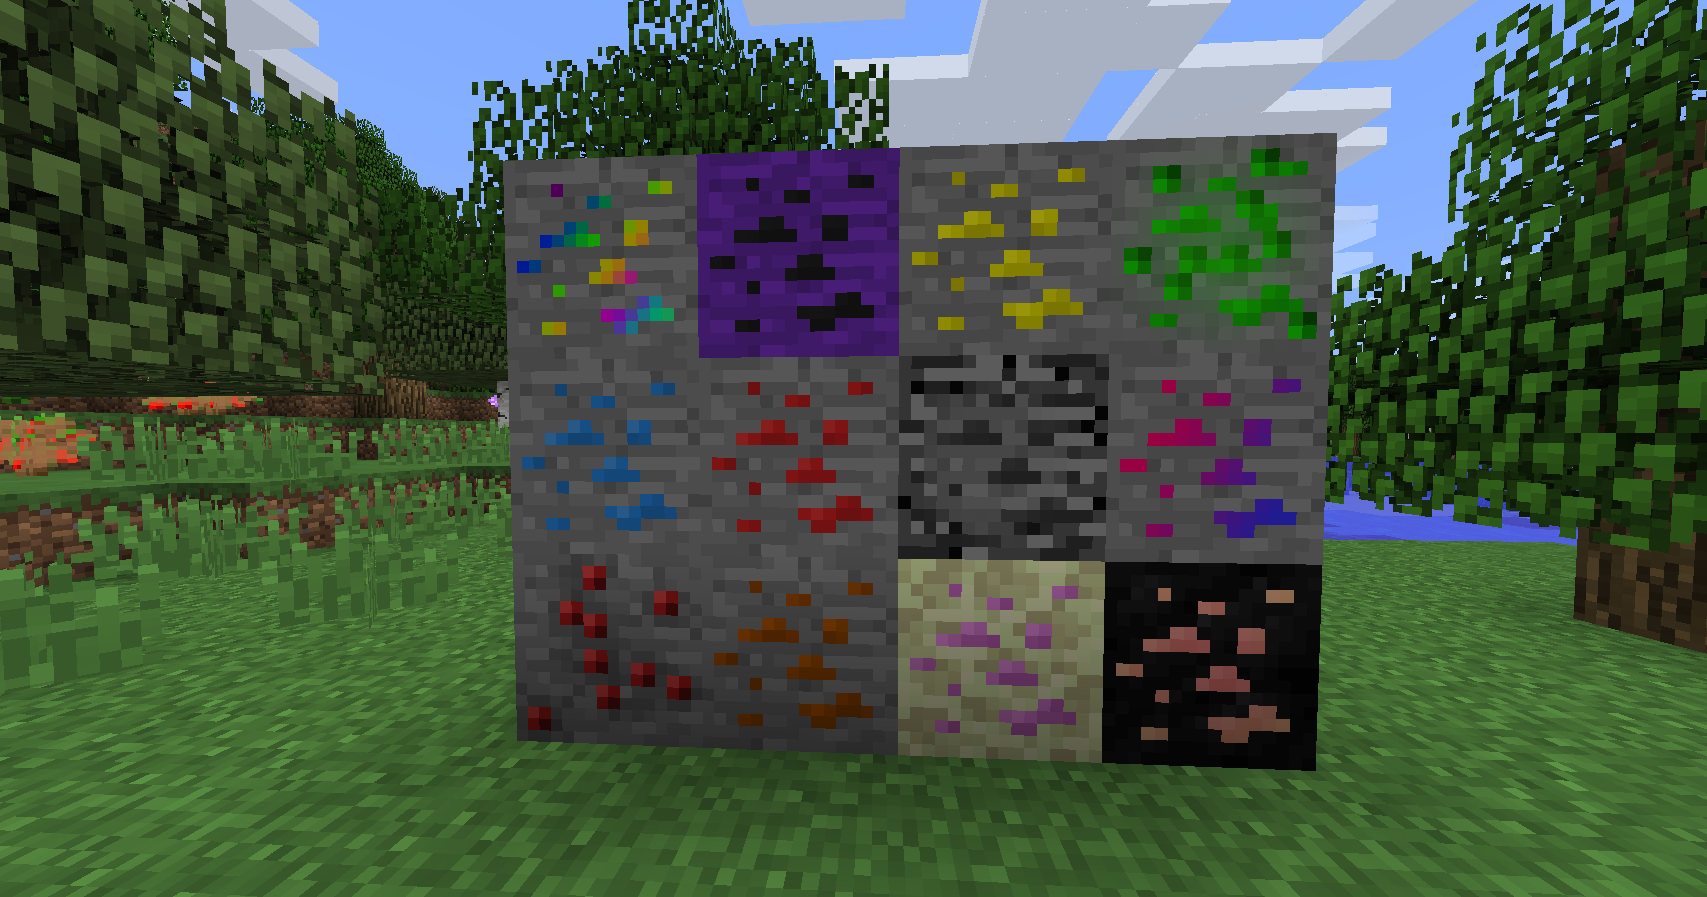 Over 30 More Ores spreaded over different Dimensions!